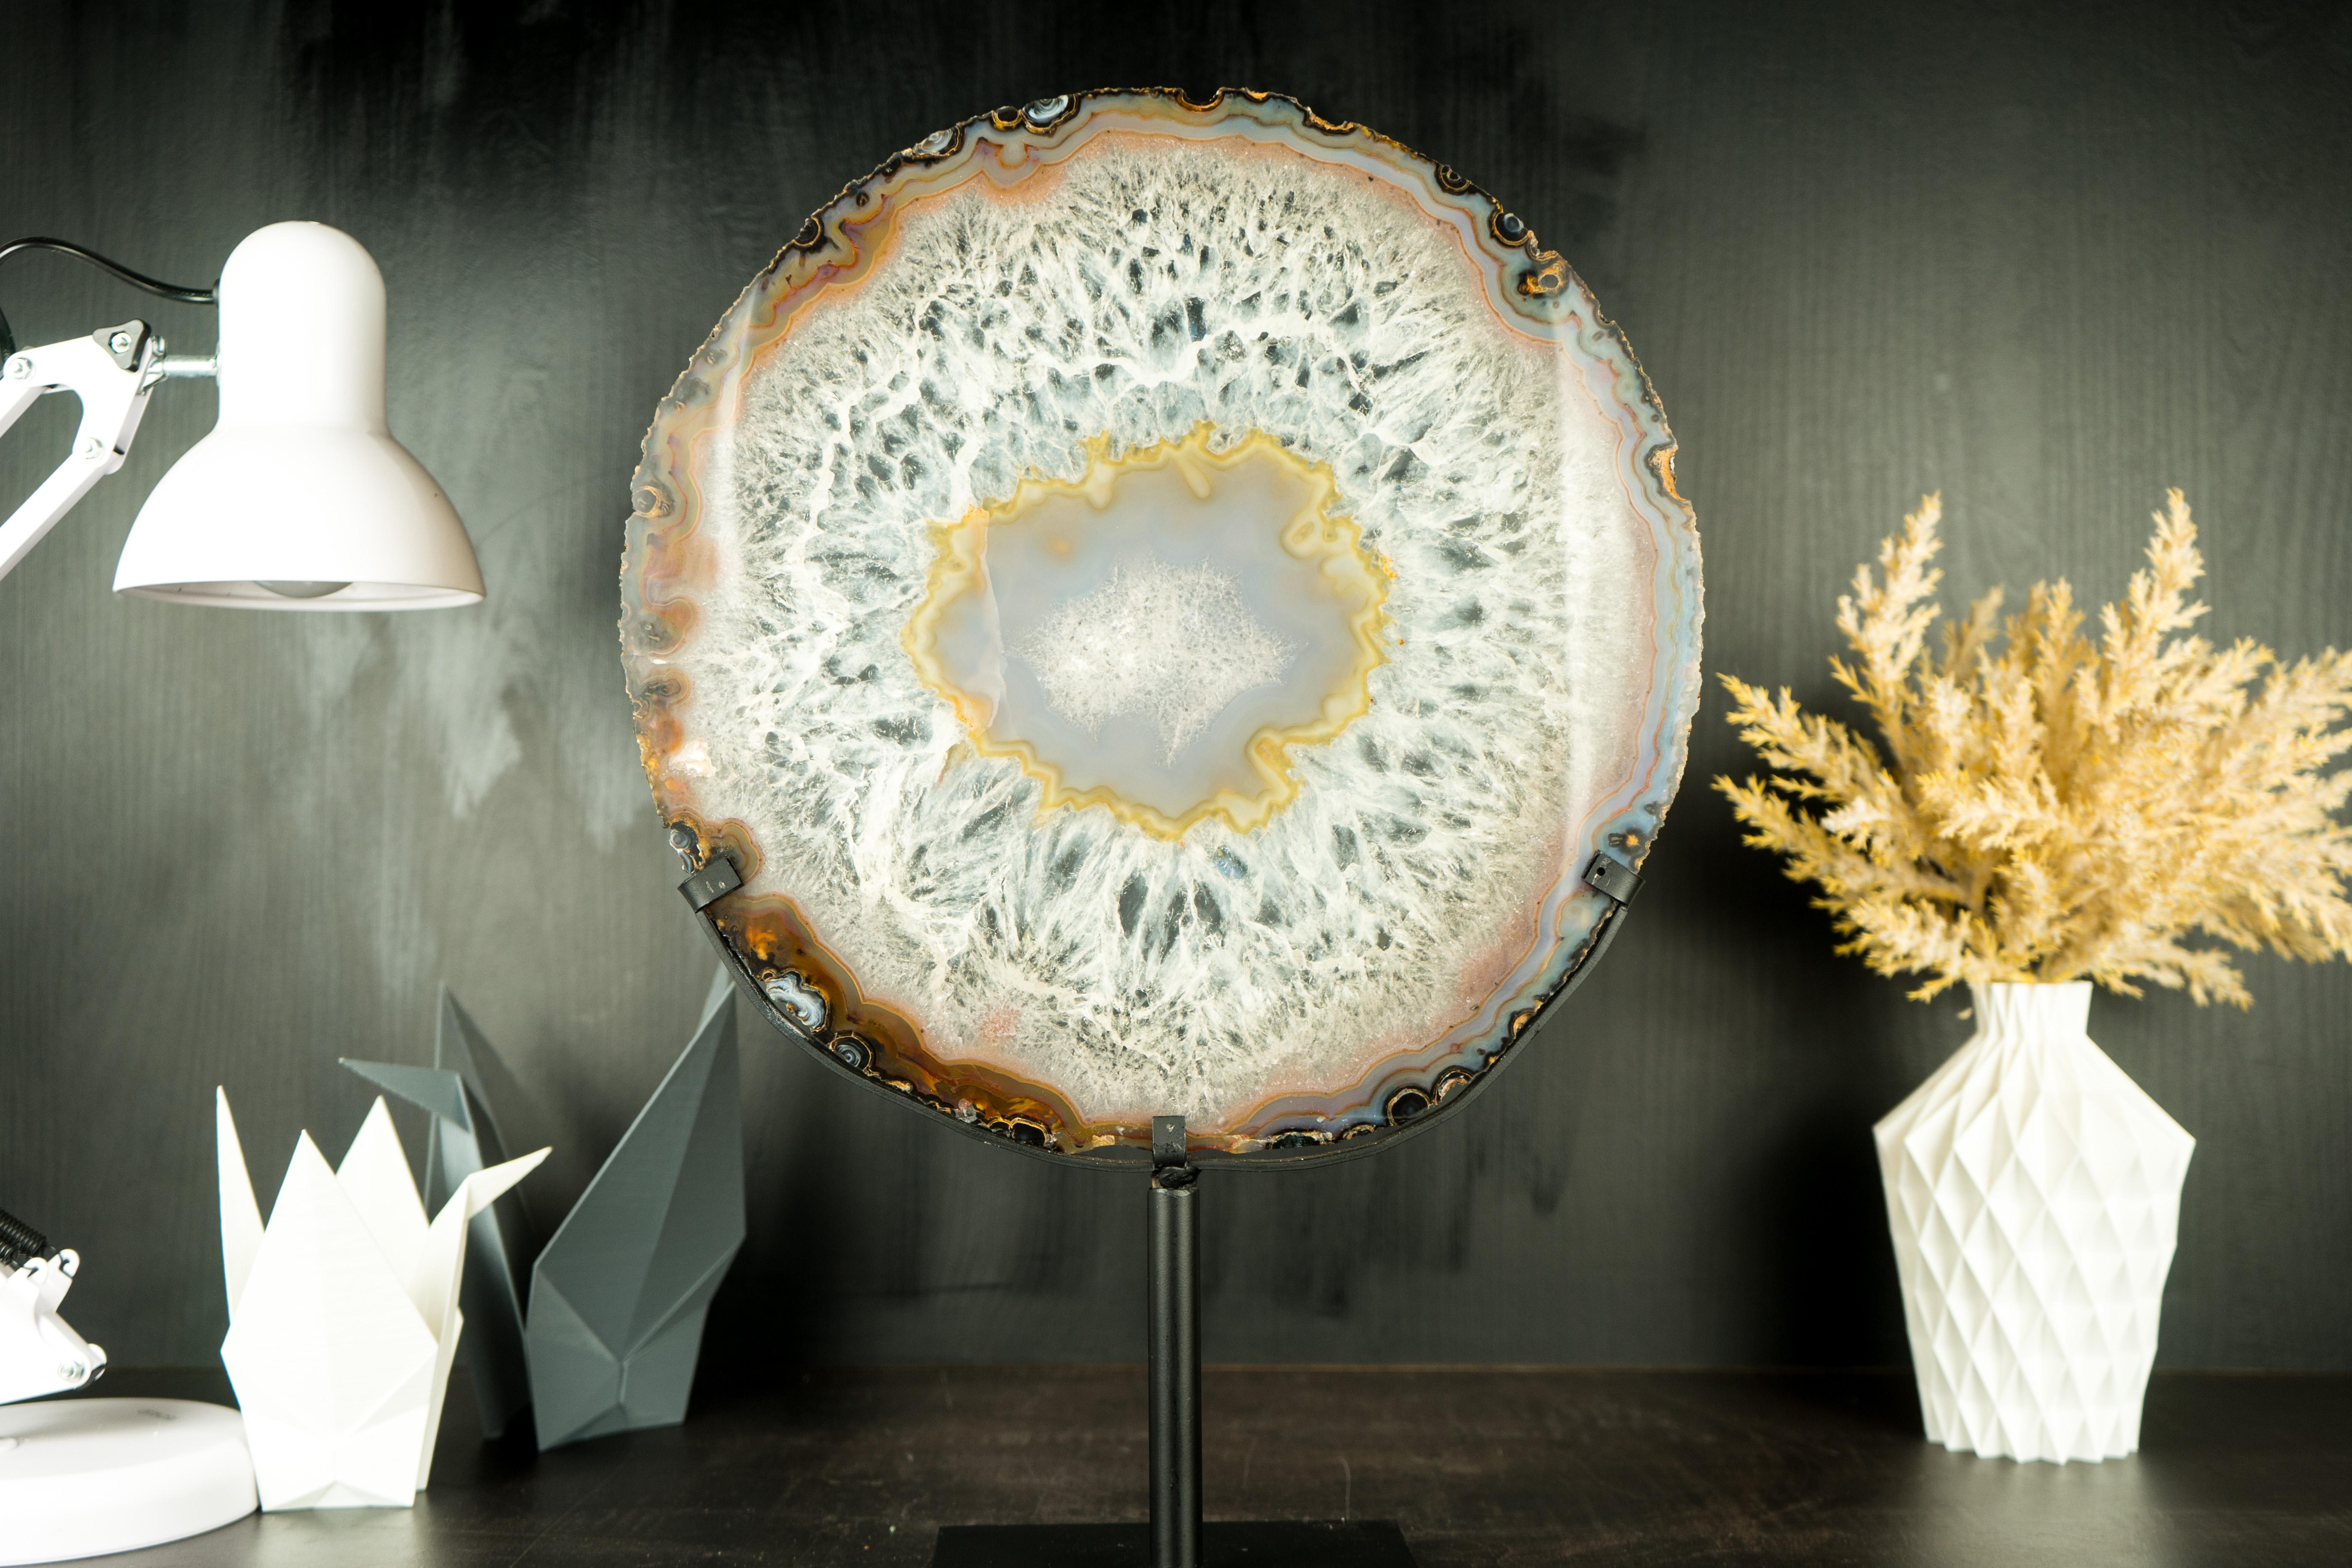 Gallery Grade Large Lace Agate Slice, with Ice-Like Crystal and Colorful Agate 13